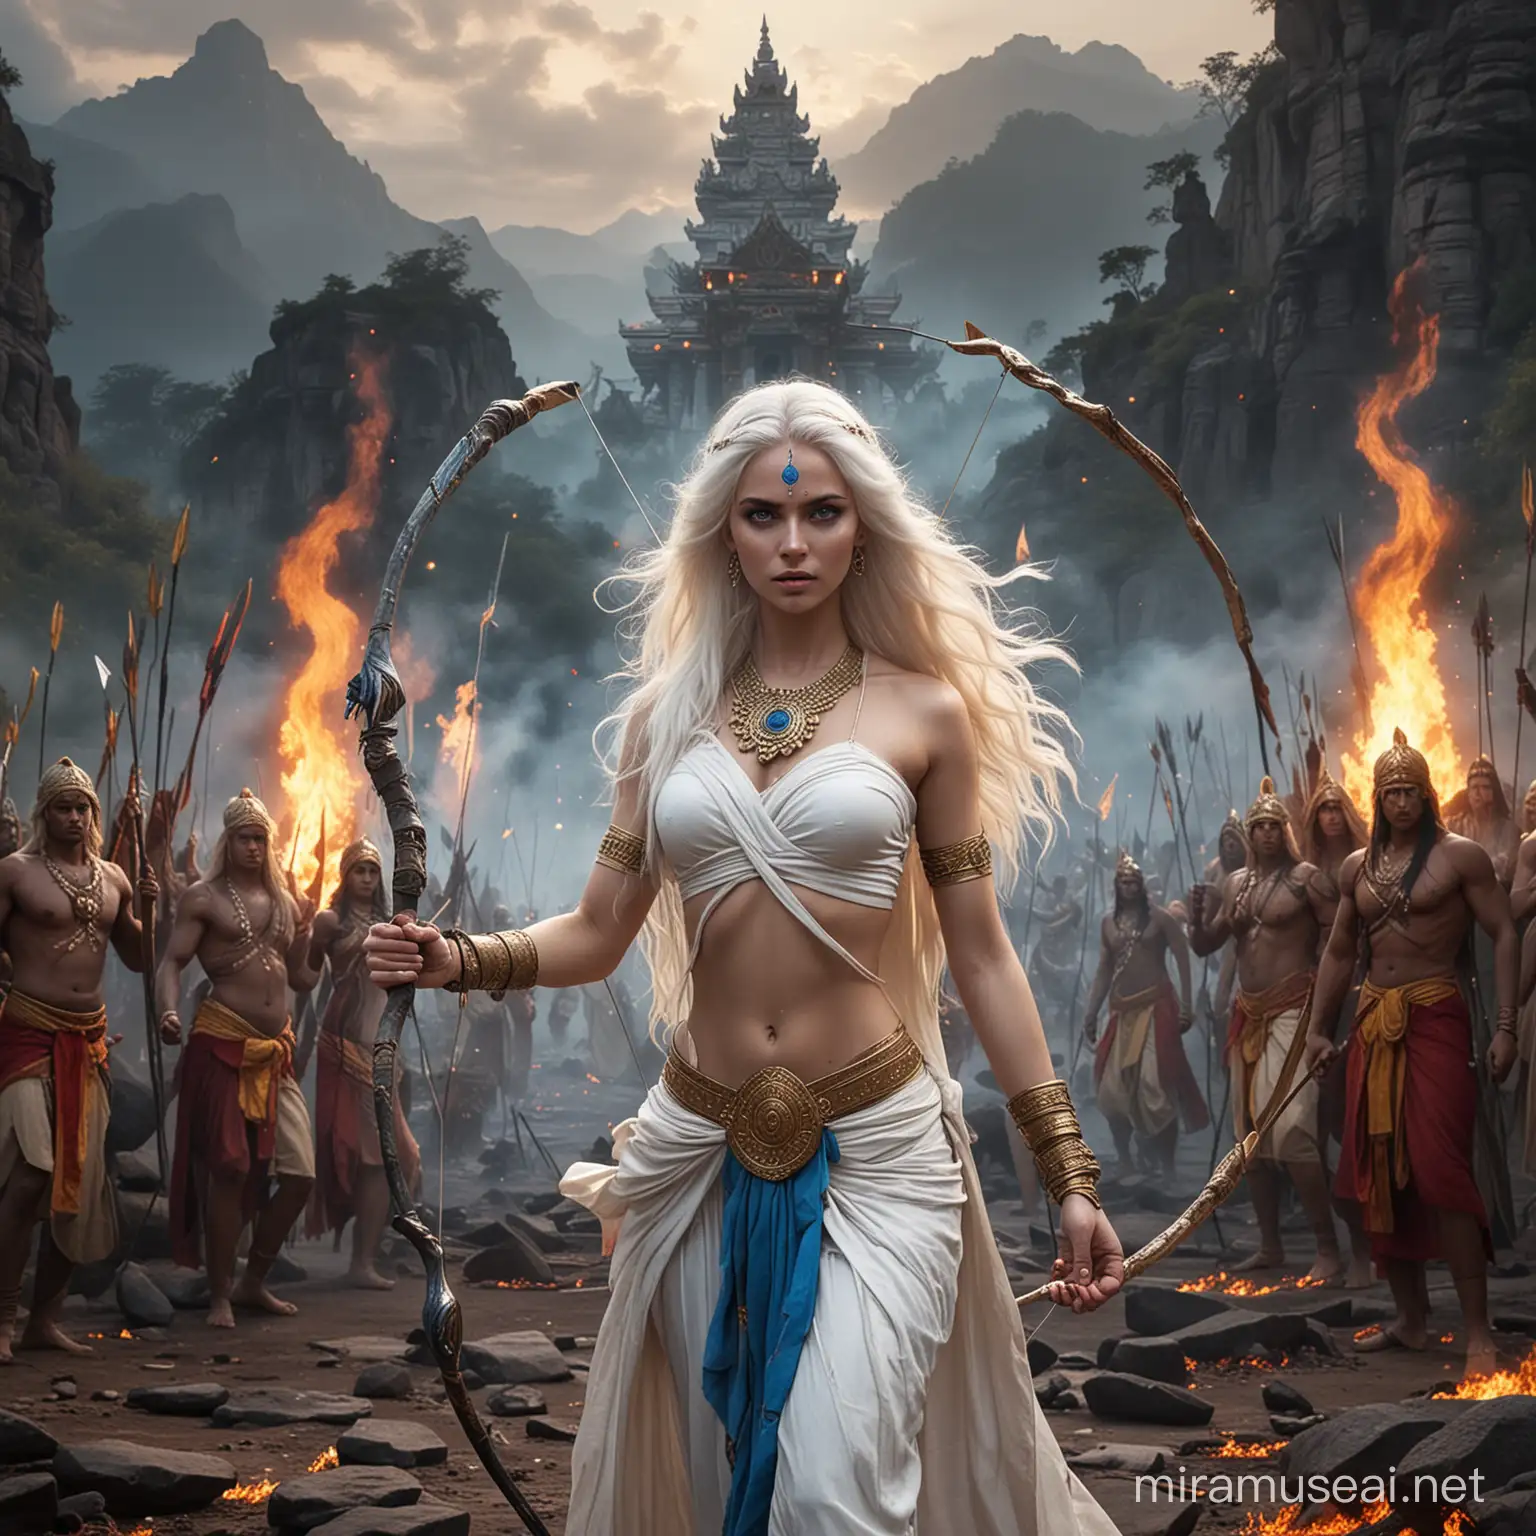 Powerful Goddess Empress in Mystical Battle Surrounded by Fire and Cosmic Energy